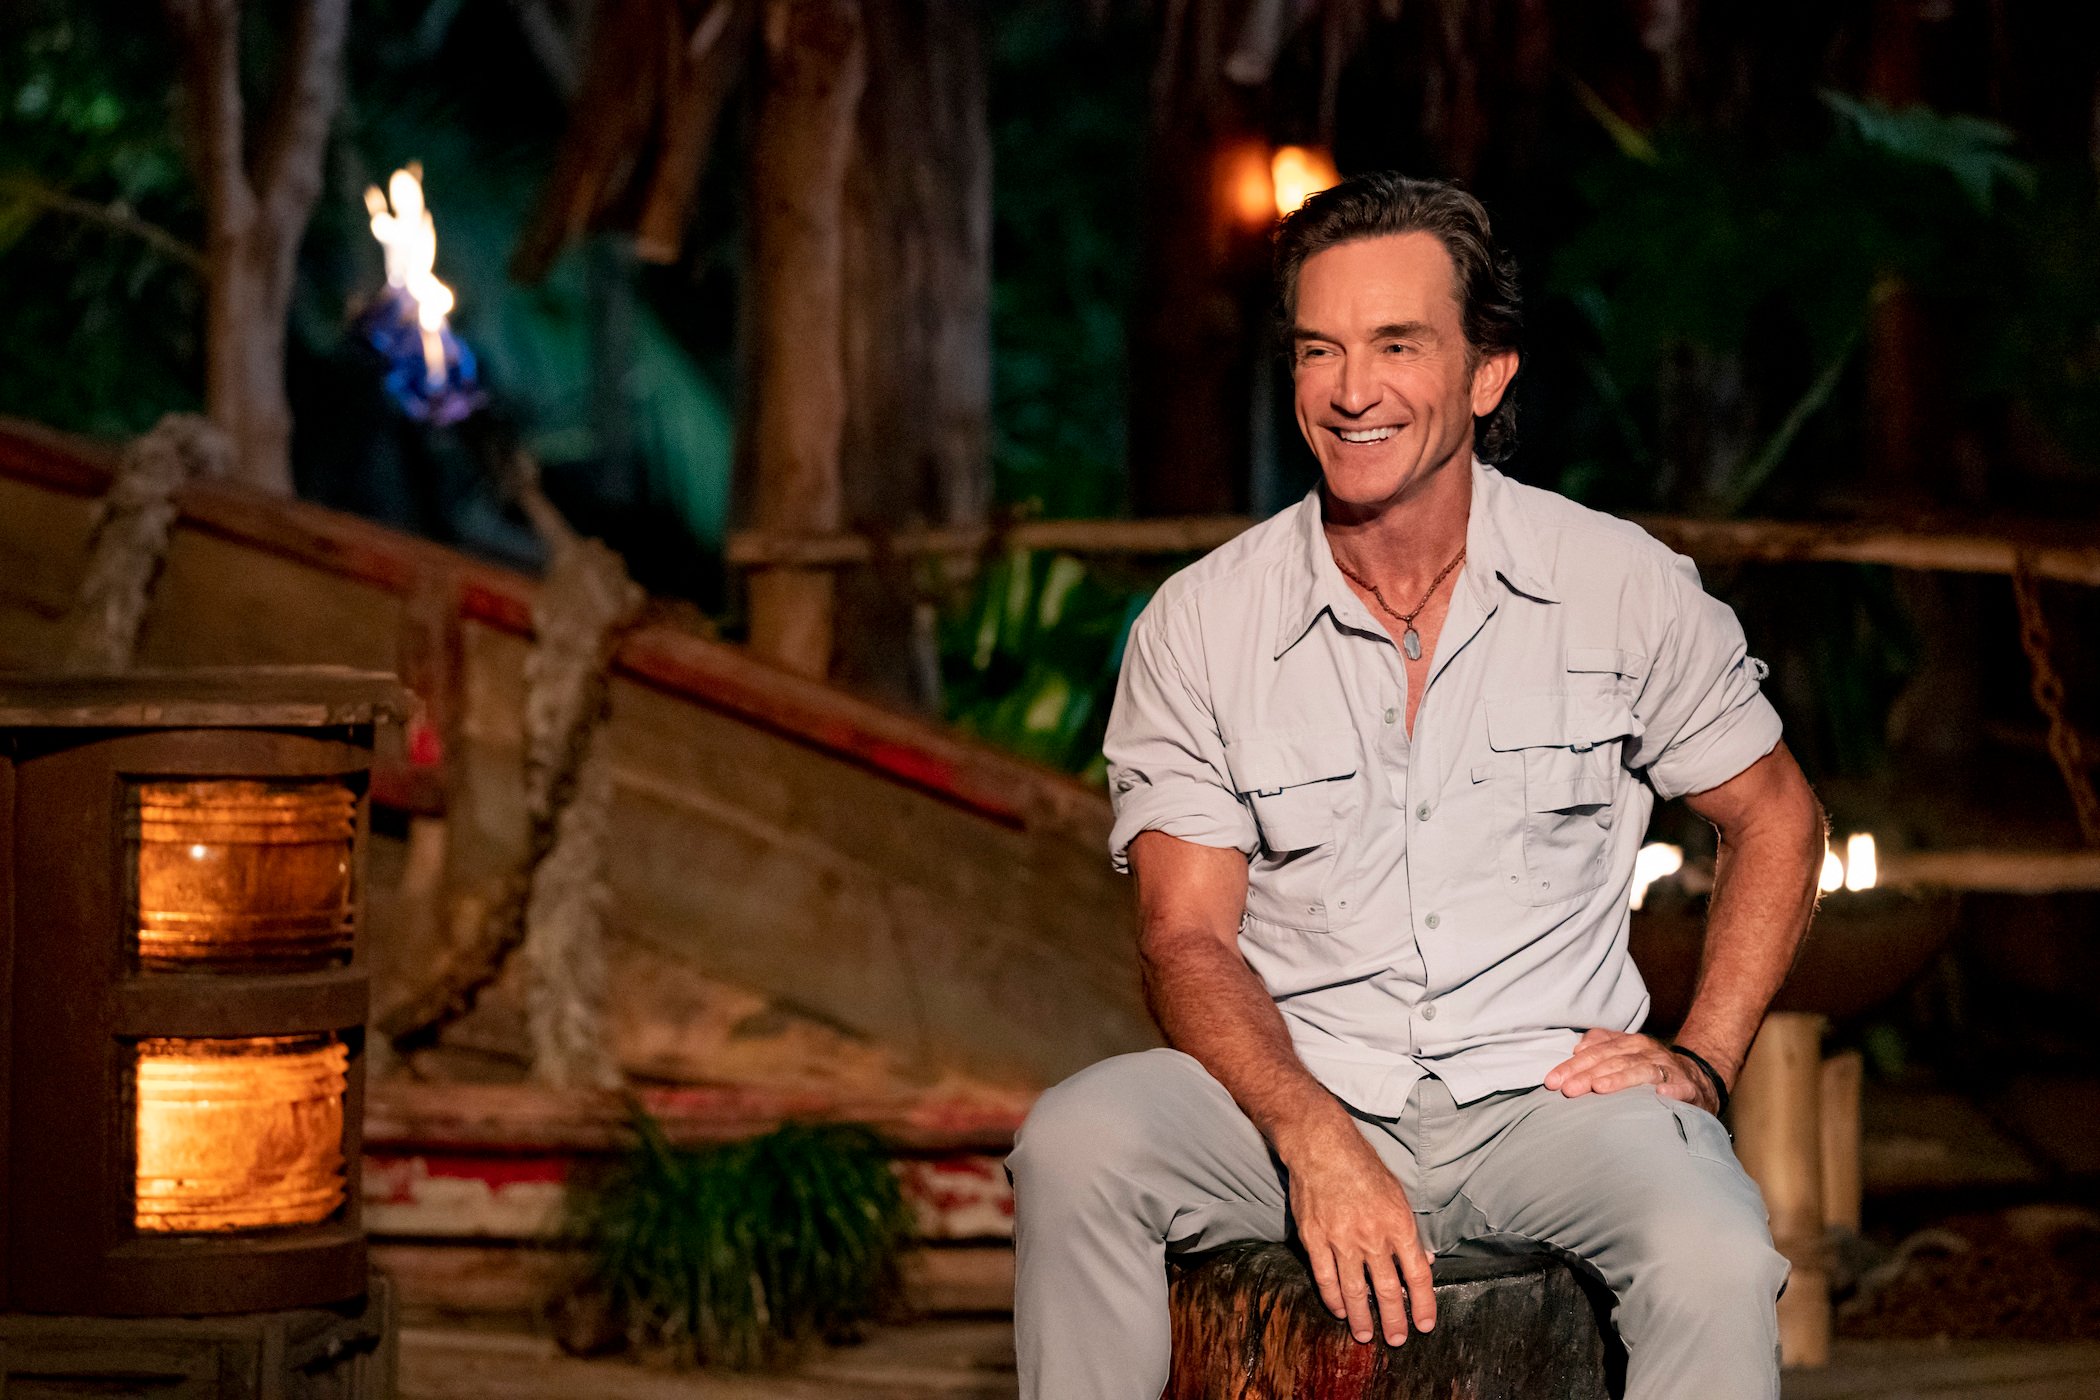 'Survivor' Season 41 host Jeff Probst sitting at Tribal Council. Probst's hoarse voice had fans wondering if he was sick